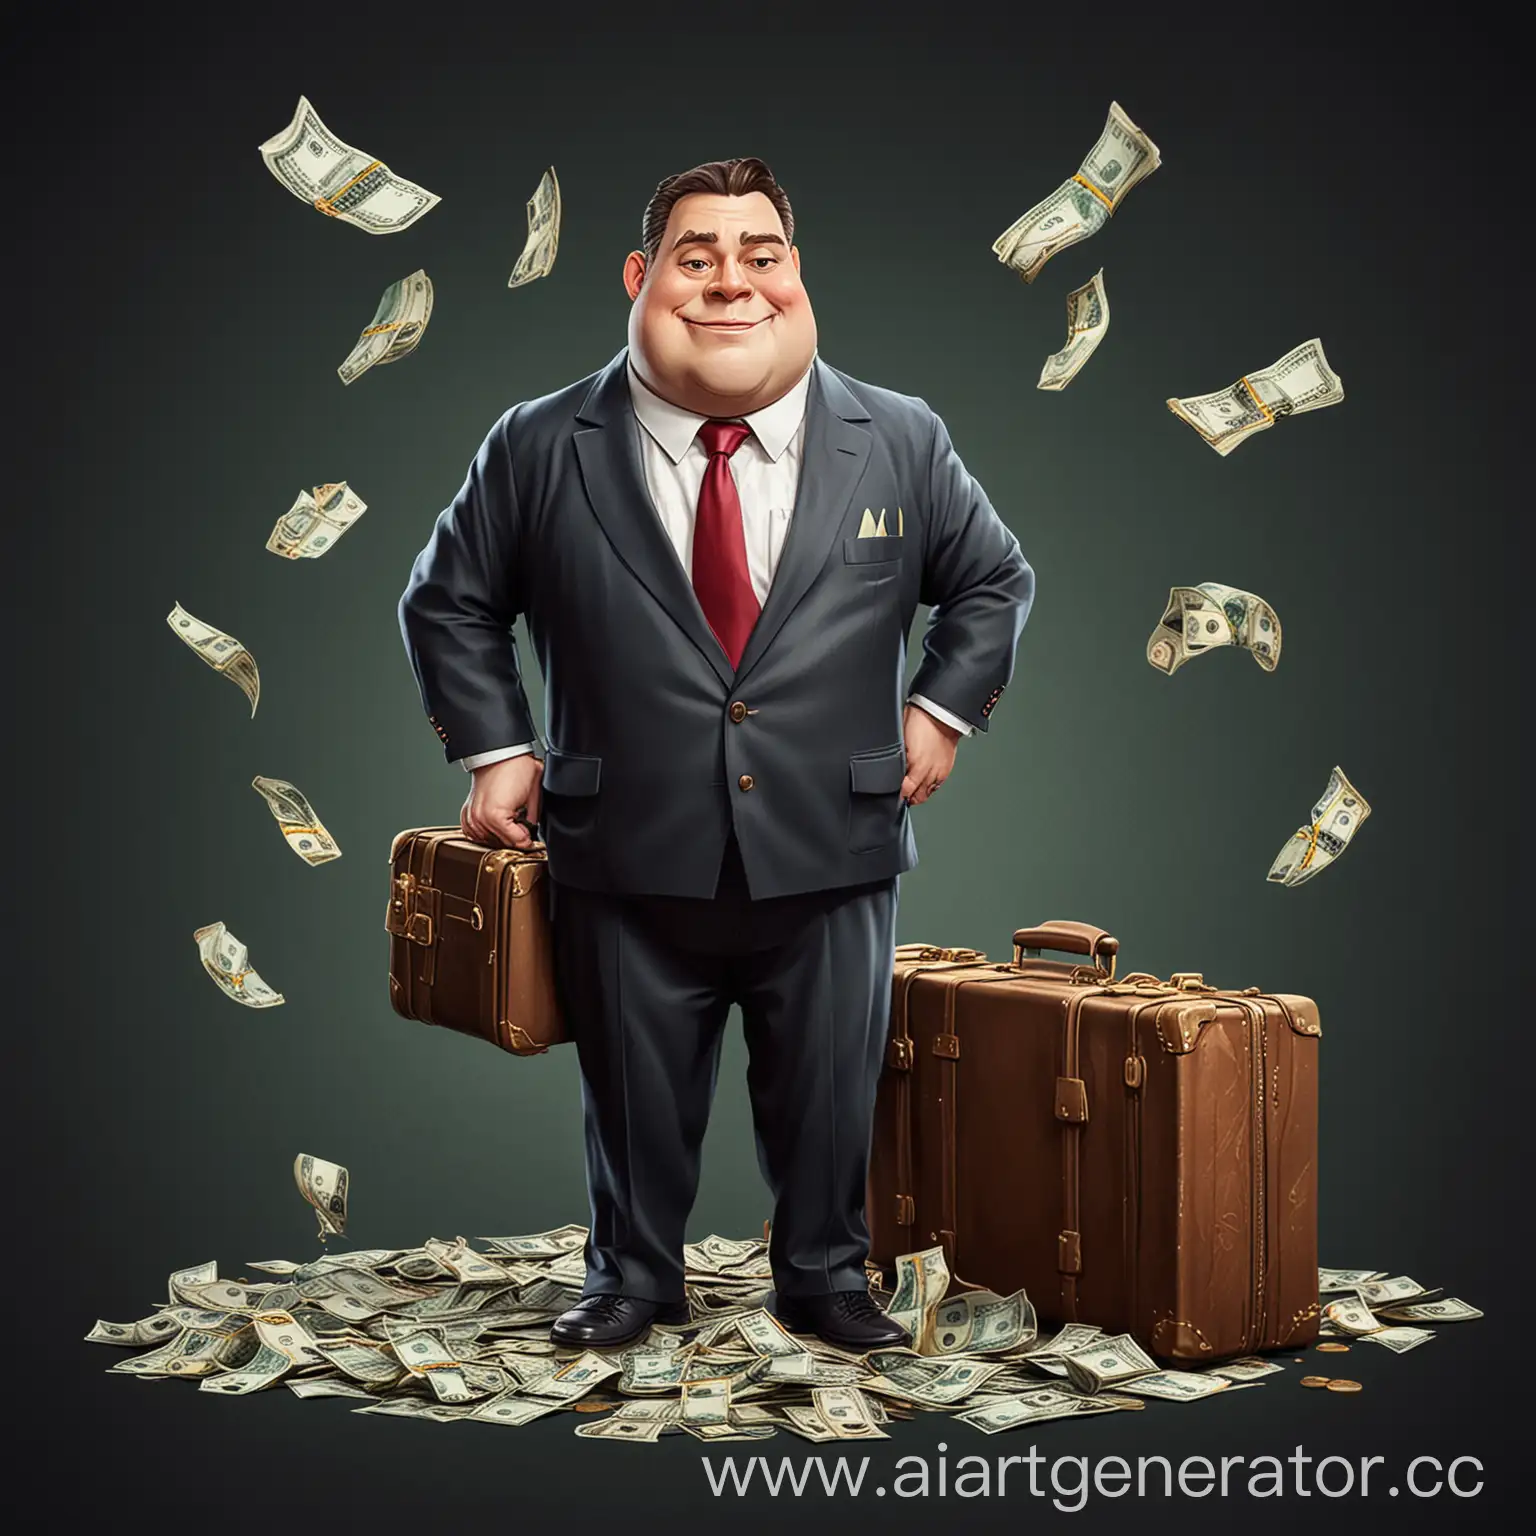 Wealthy-Cartoon-Millionaire-Surrounded-by-Cash-and-Suitcase